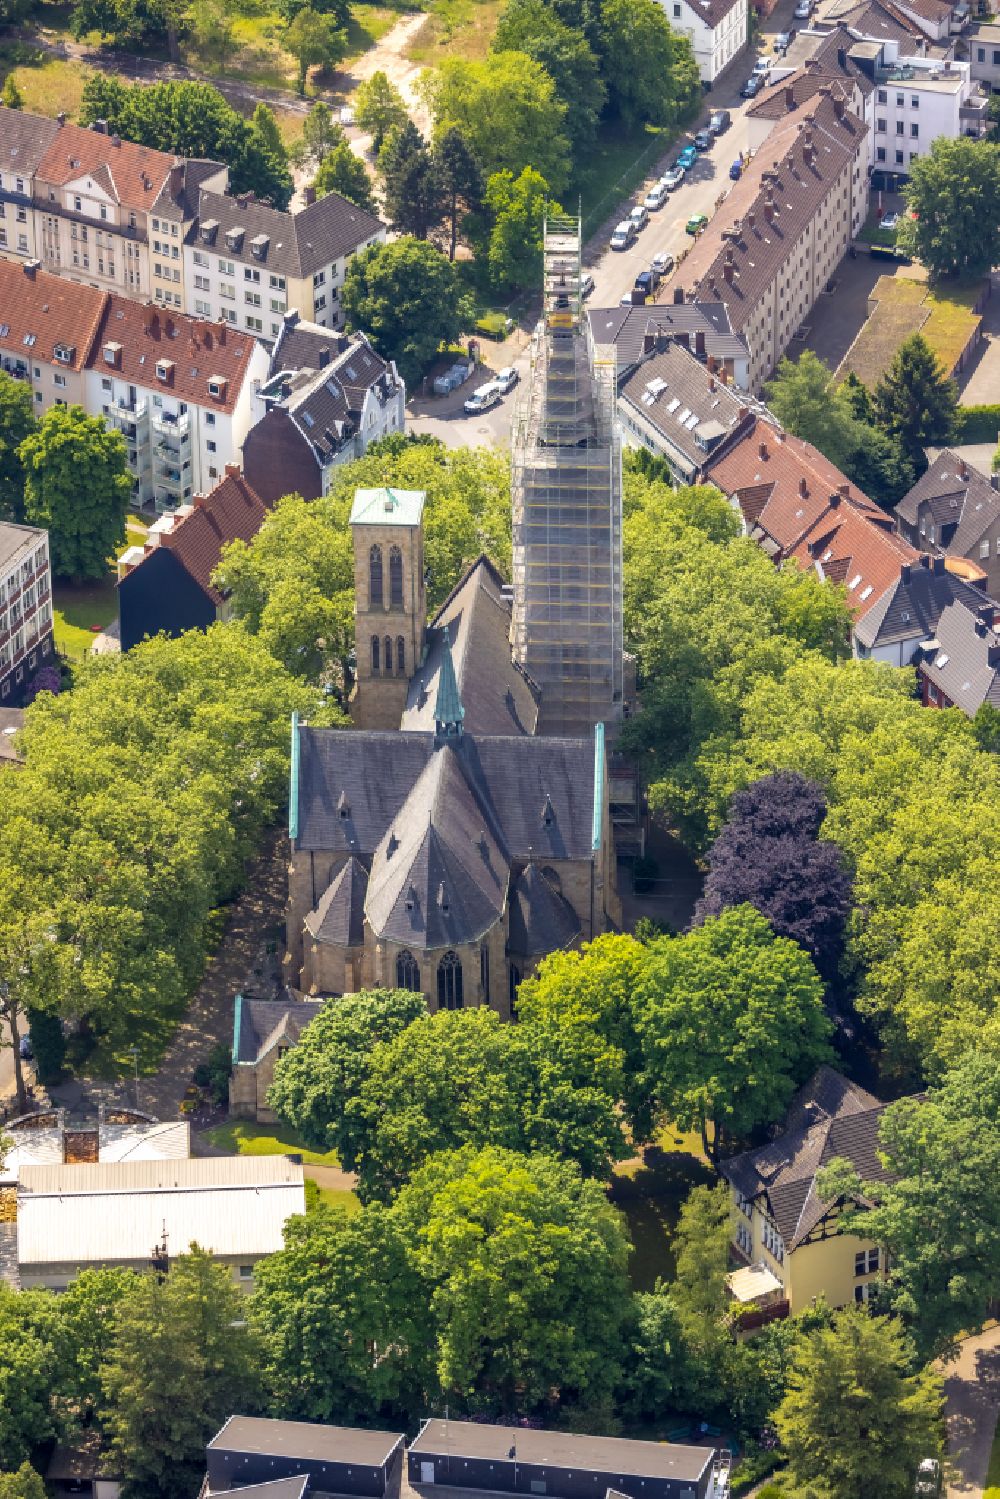 Herne from the bird's eye view: Construction site for renovation and reconstruction work on the church building Herz Jesu Kirche on street Duengelstrasse in Herne at Ruhrgebiet in the state North Rhine-Westphalia, Germany